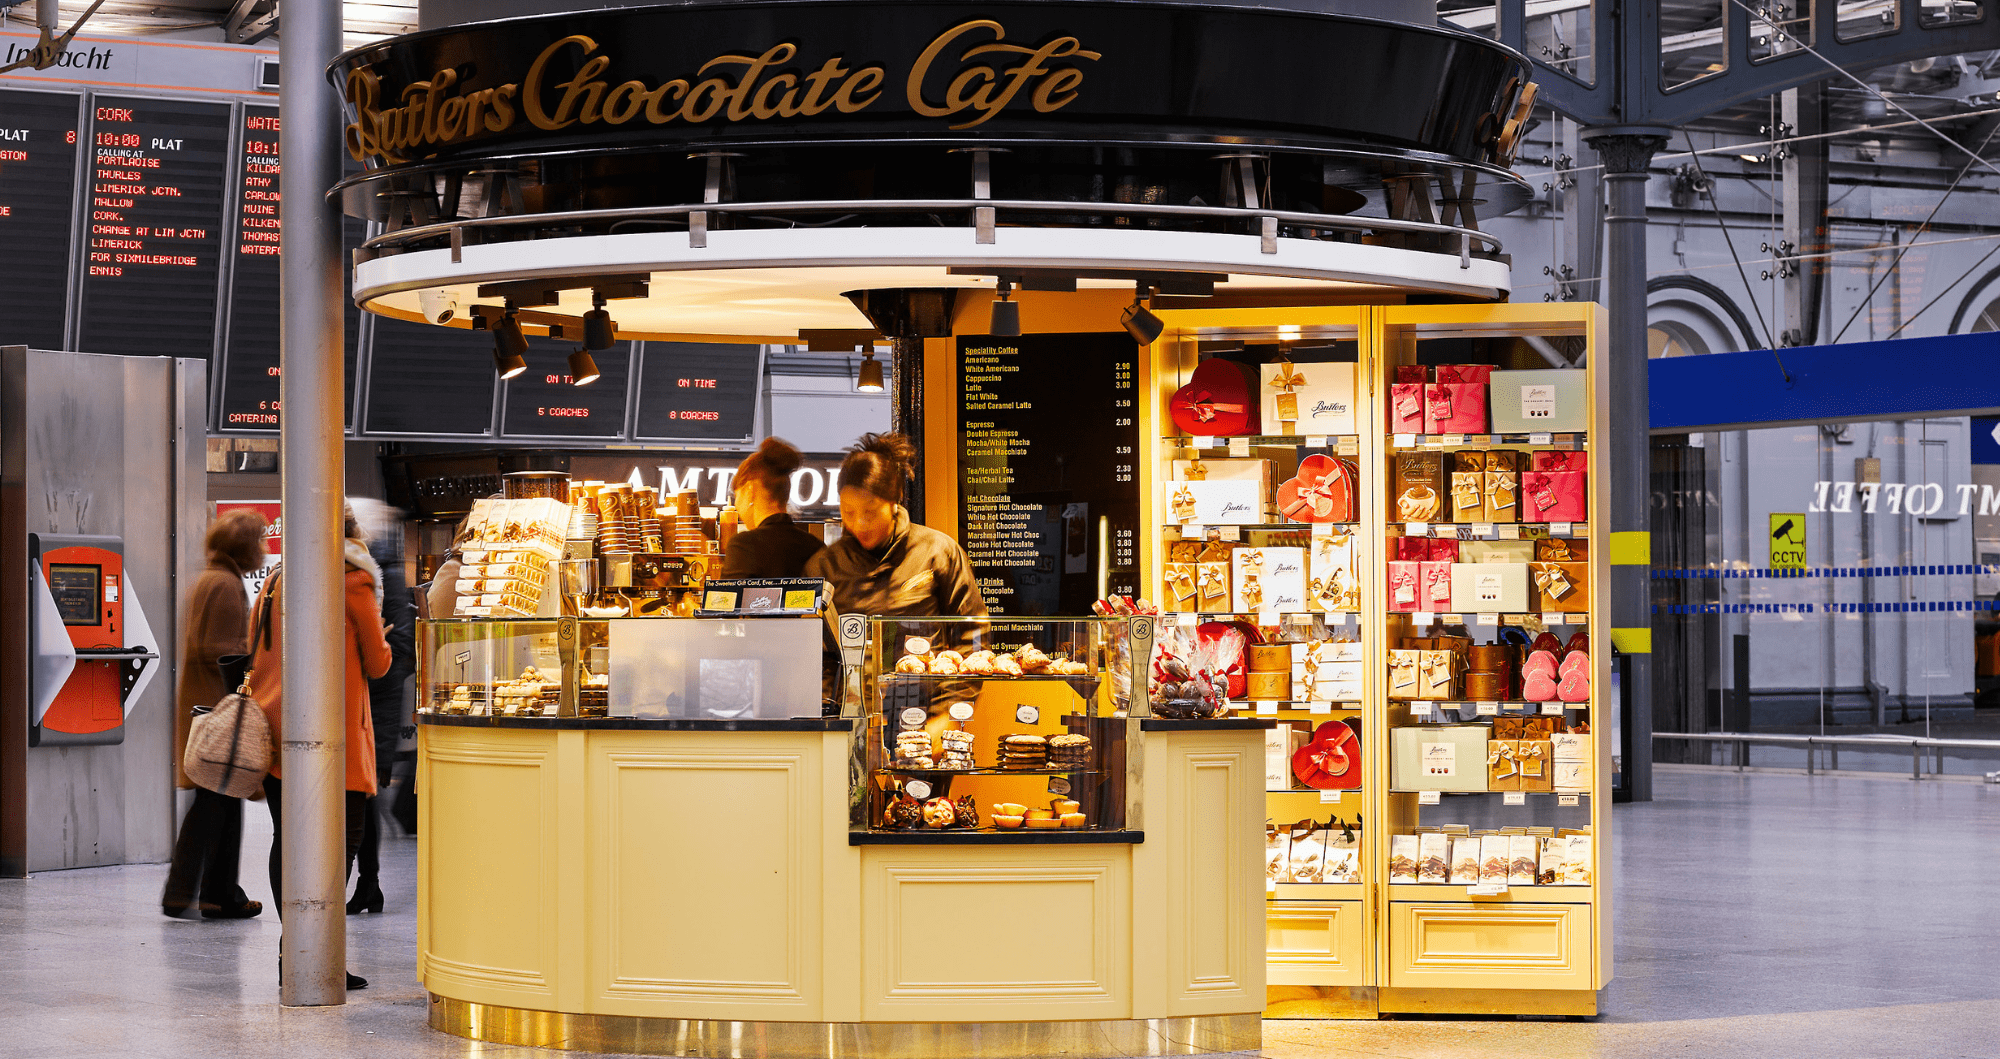 Butlers Chocolate Café, Heuston Station